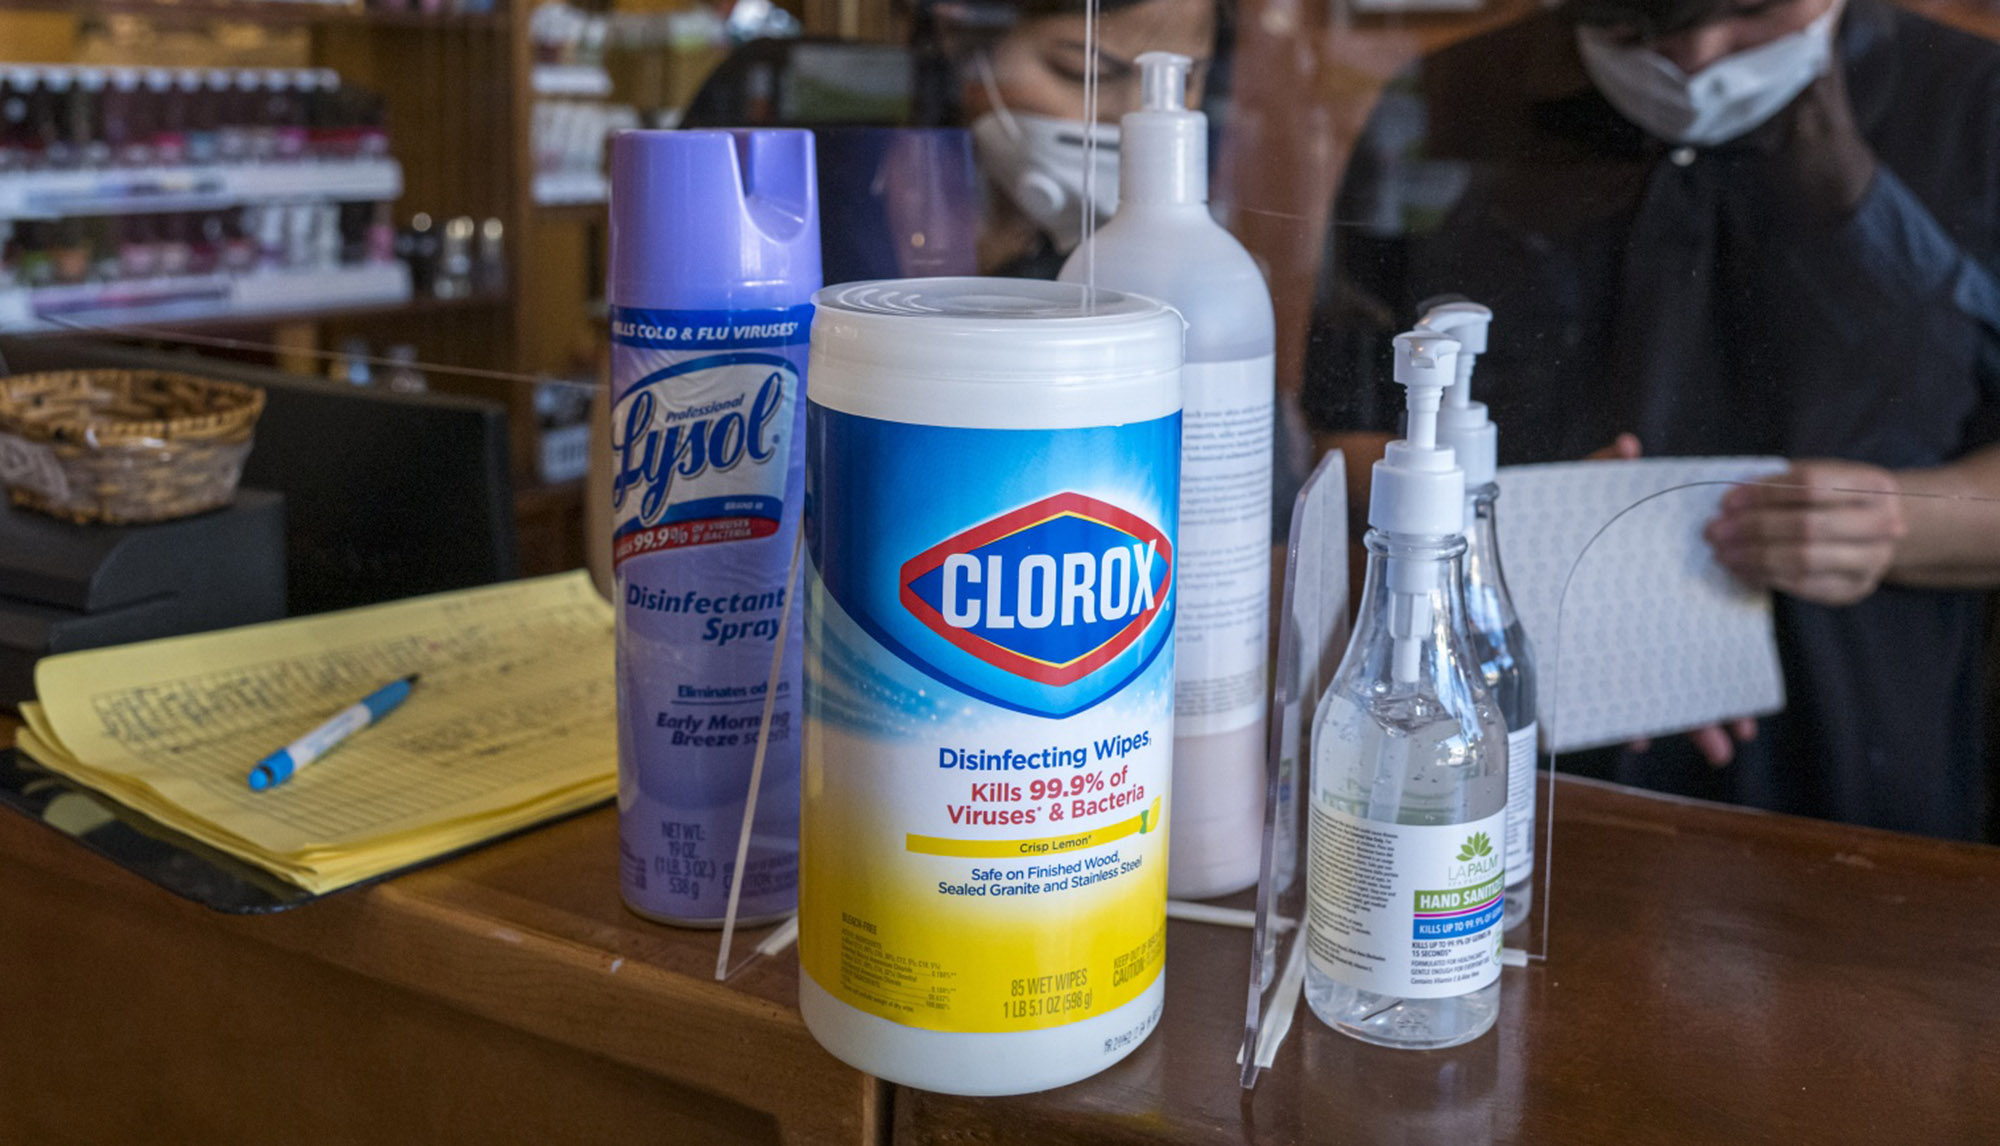 Clorox Plans More Flat Wipes Packs After Best Year Since '98 - Bloomberg